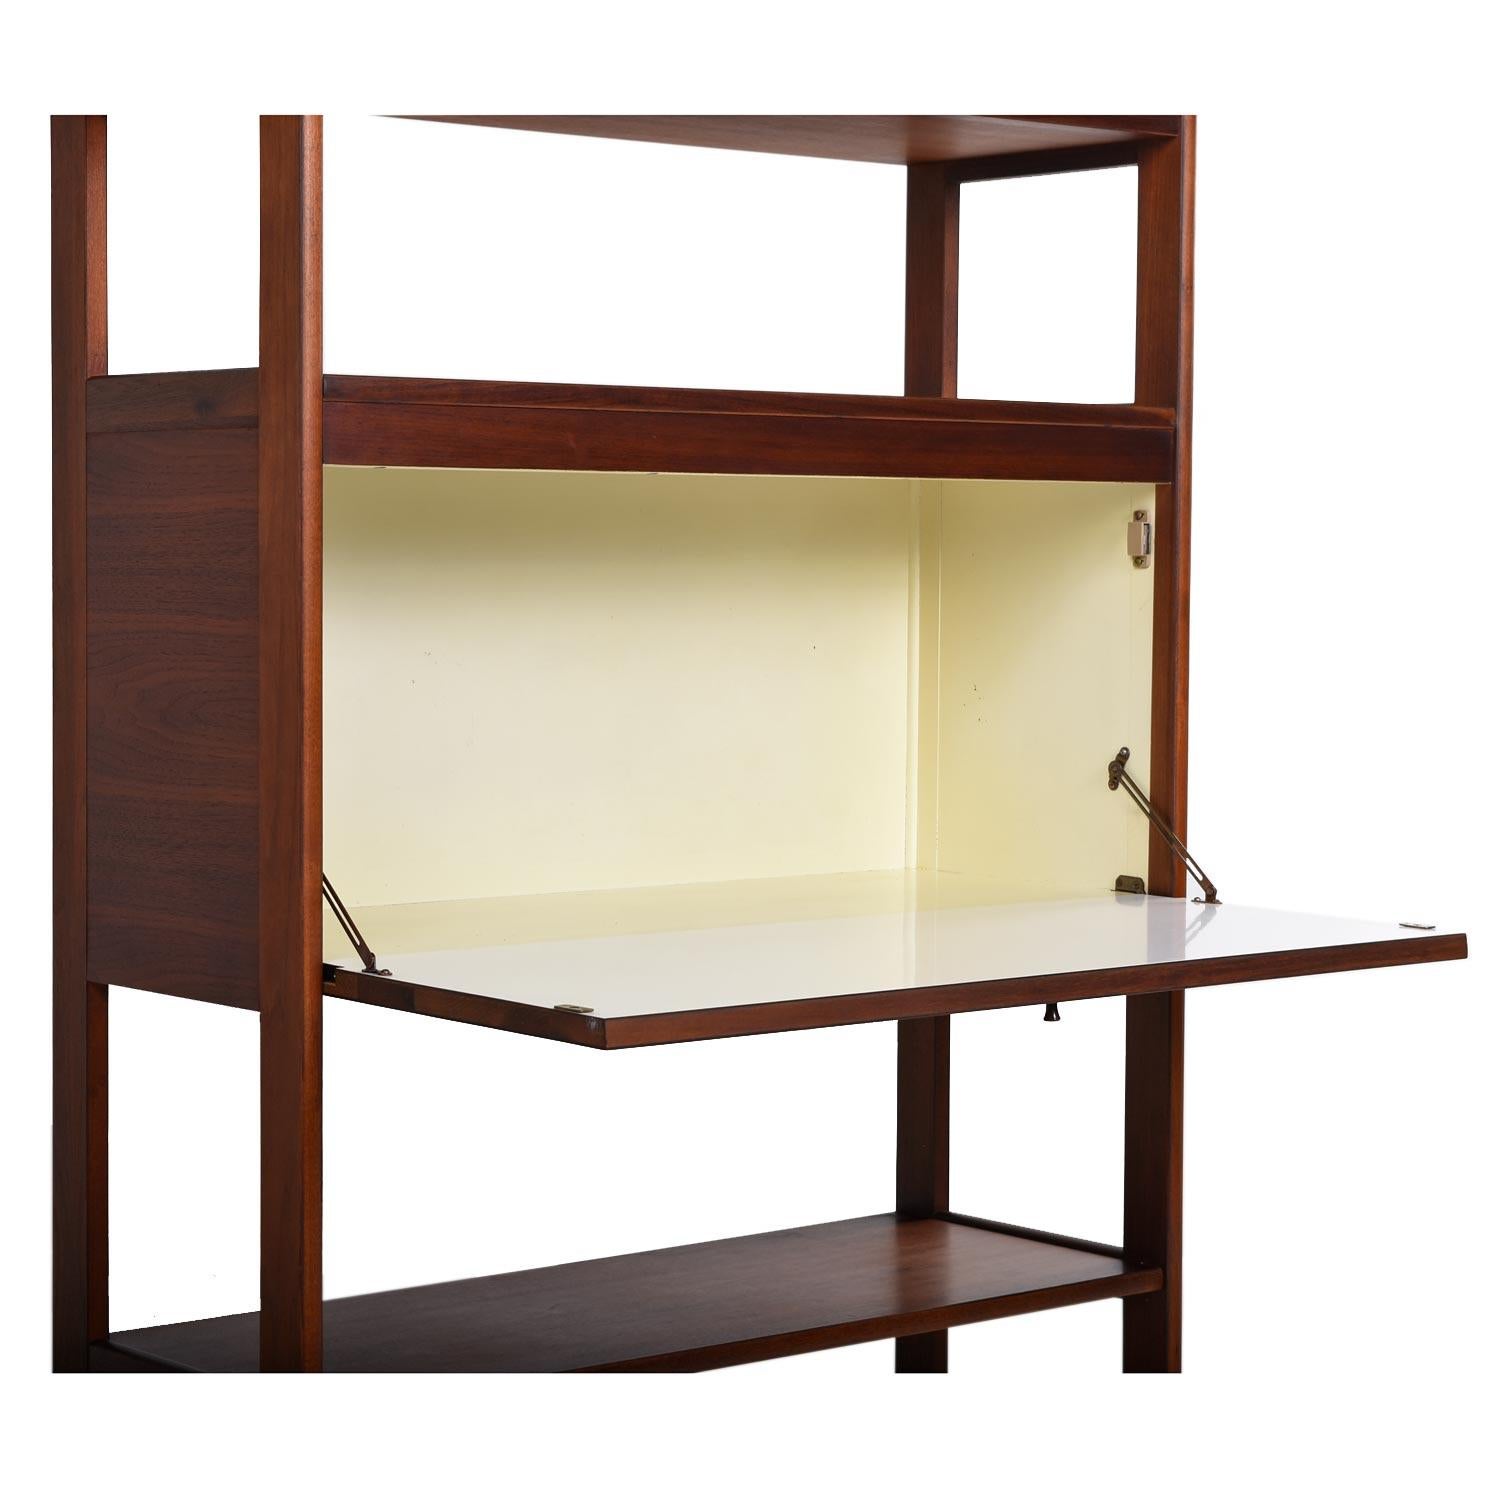 Gorgeous Scandinavian modern open two-piece walnut wall unit room divider. Stands on its own and is finished on both sides, so it can act as a room divider. Configure the cabinets however you wish to create a matrix that suits your needs. The larger